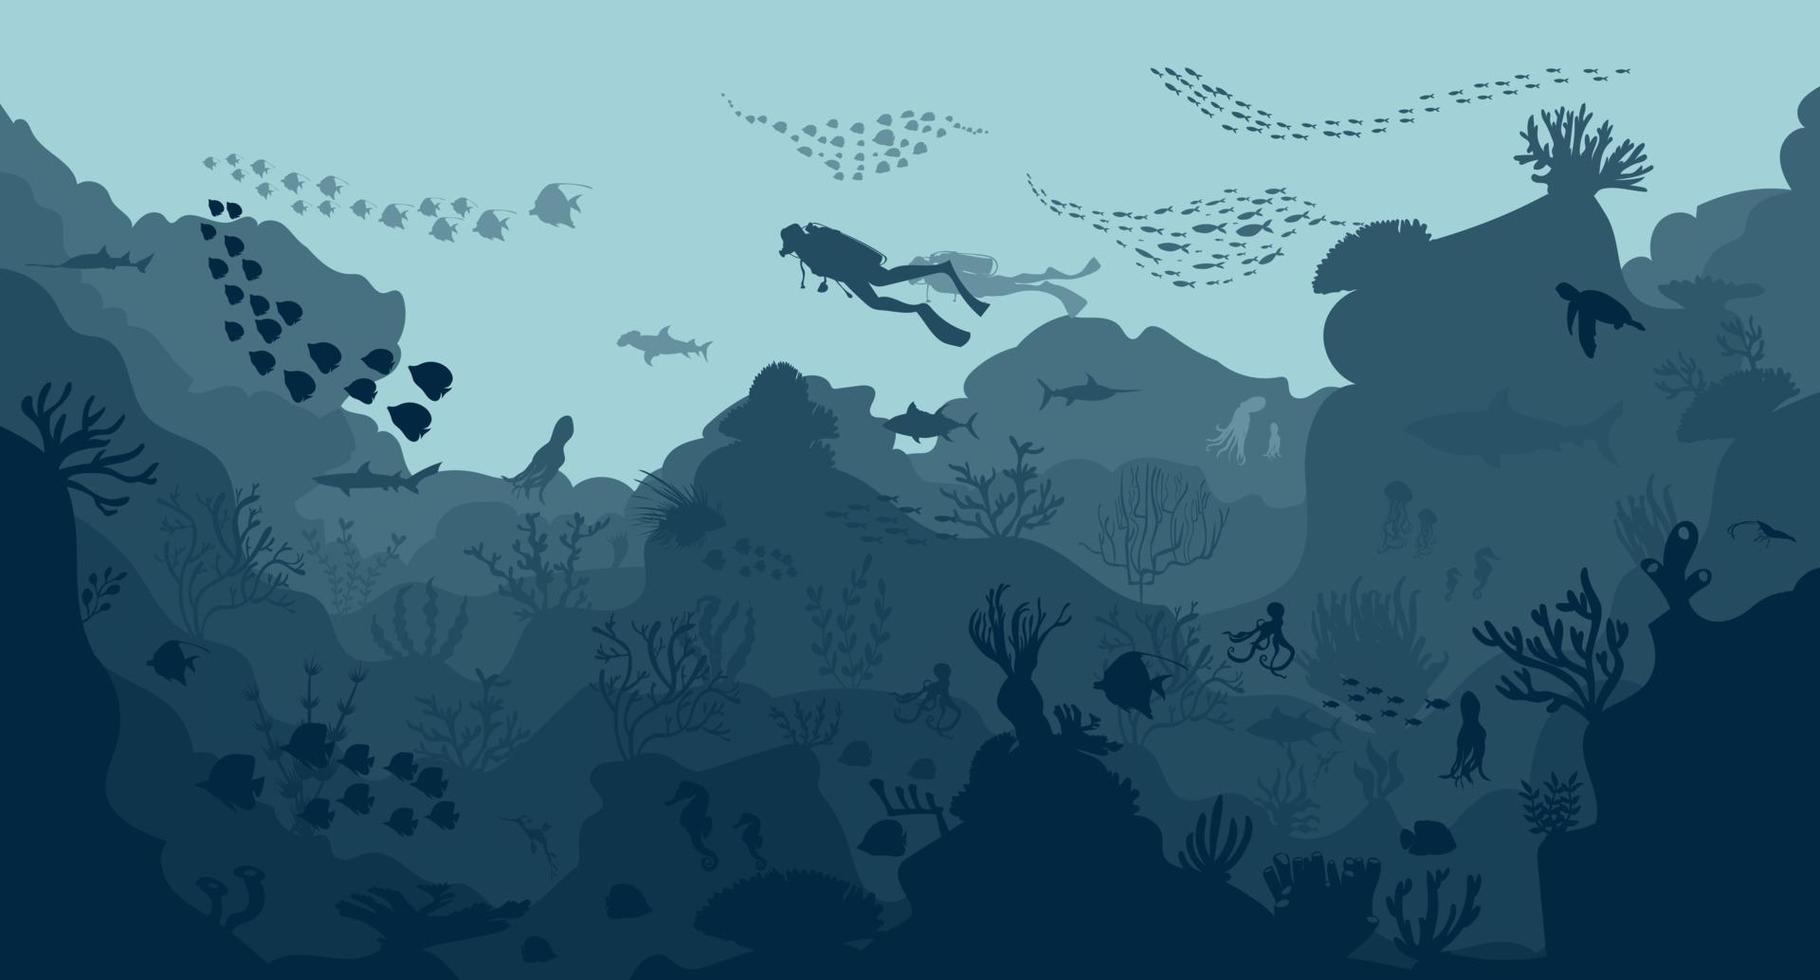 silhouette of coral reef with fish on blue sea background underwater vector illustration